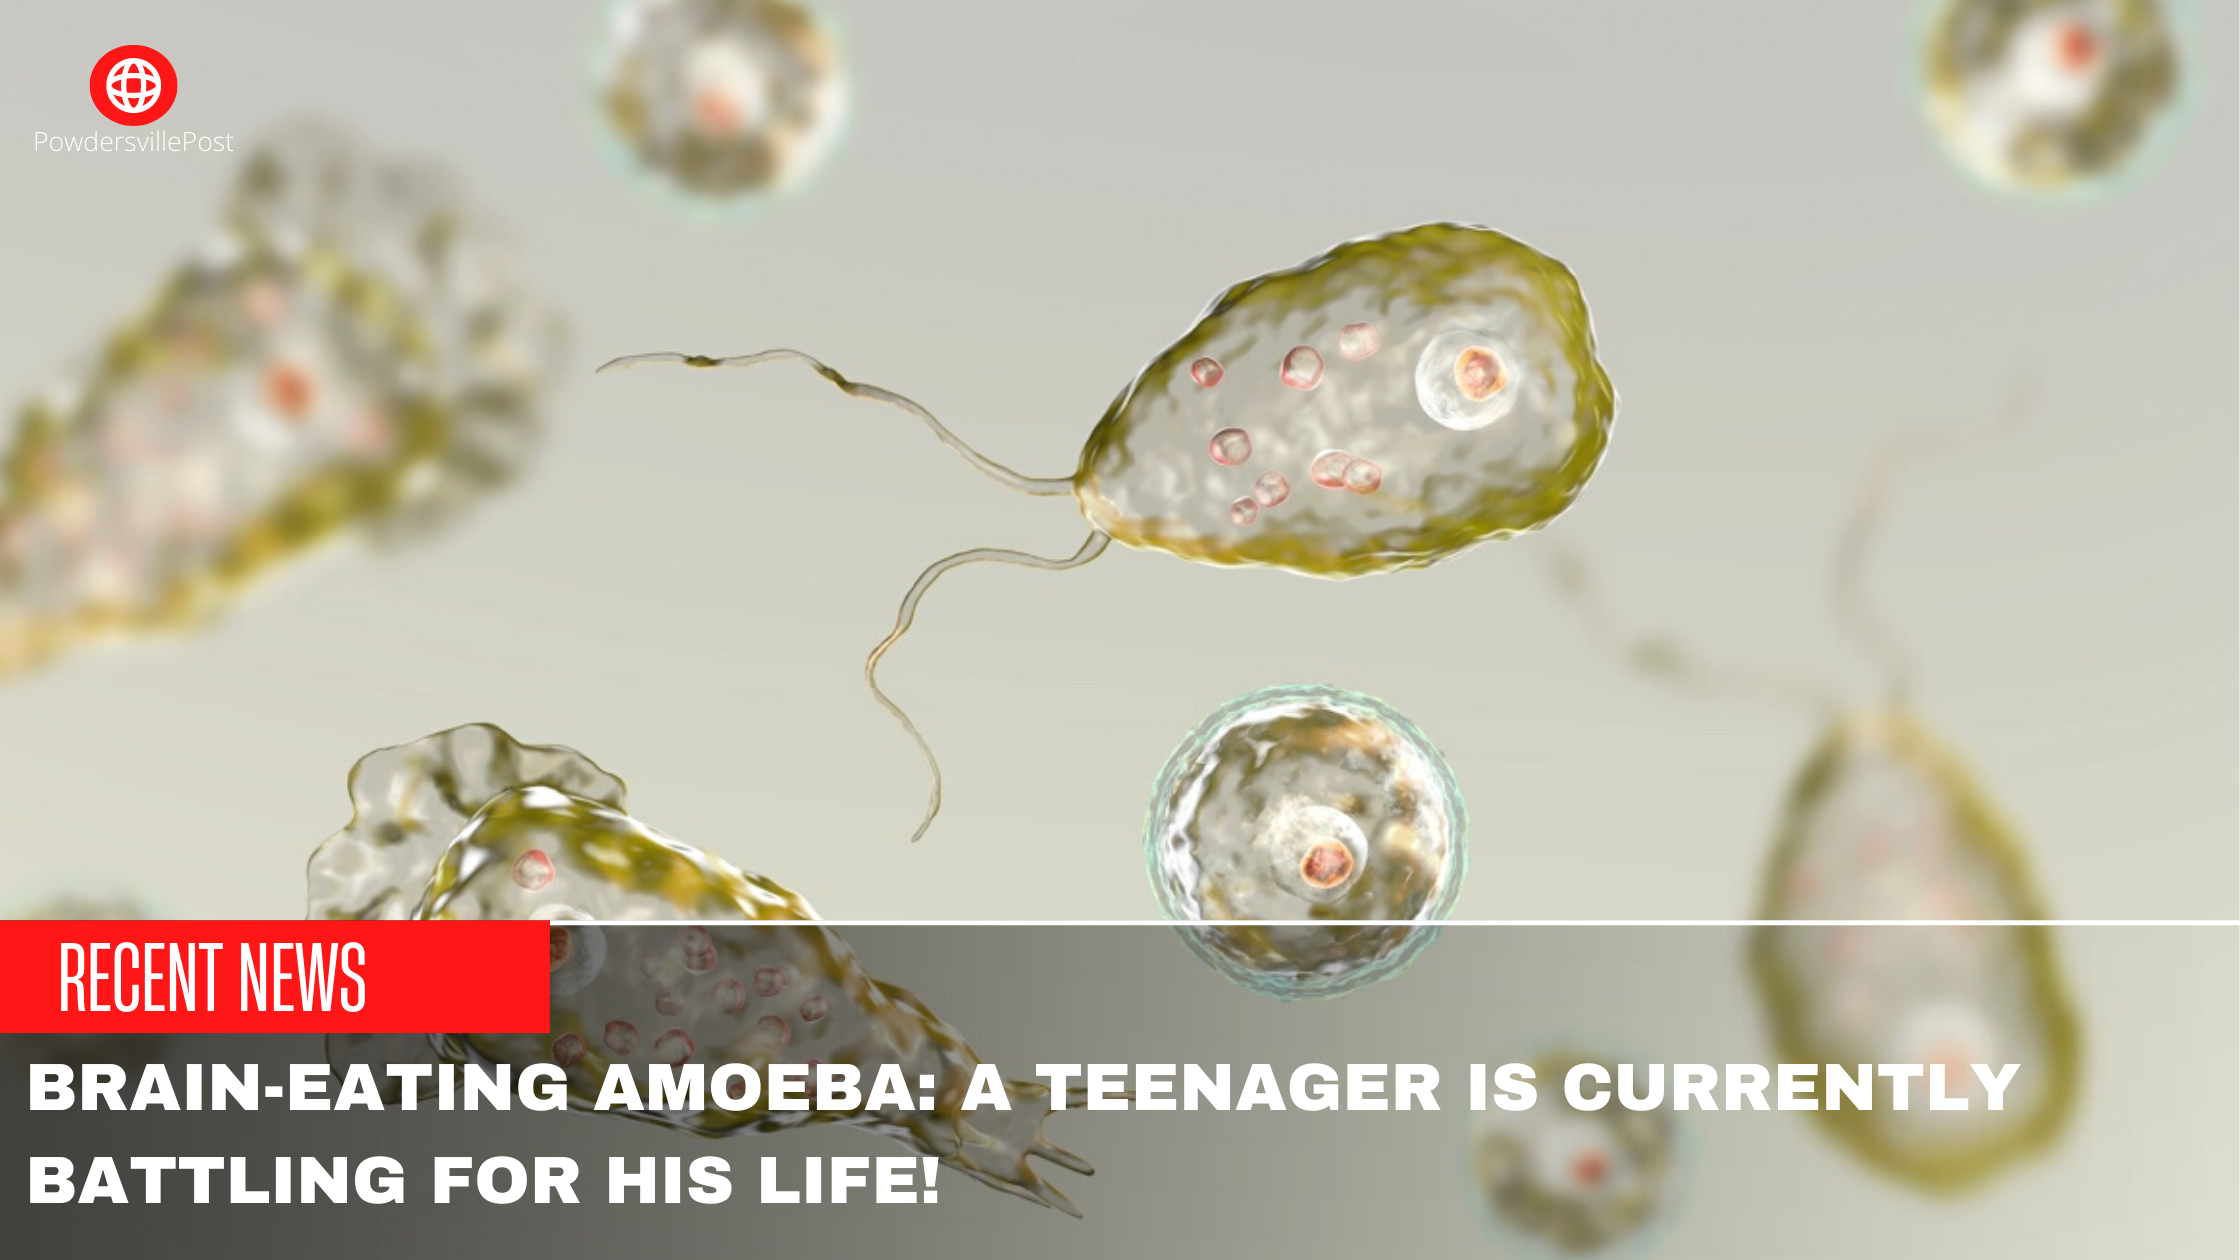 Brain-Eating Amoeba A Teenager Is Currently Battling For His Life!